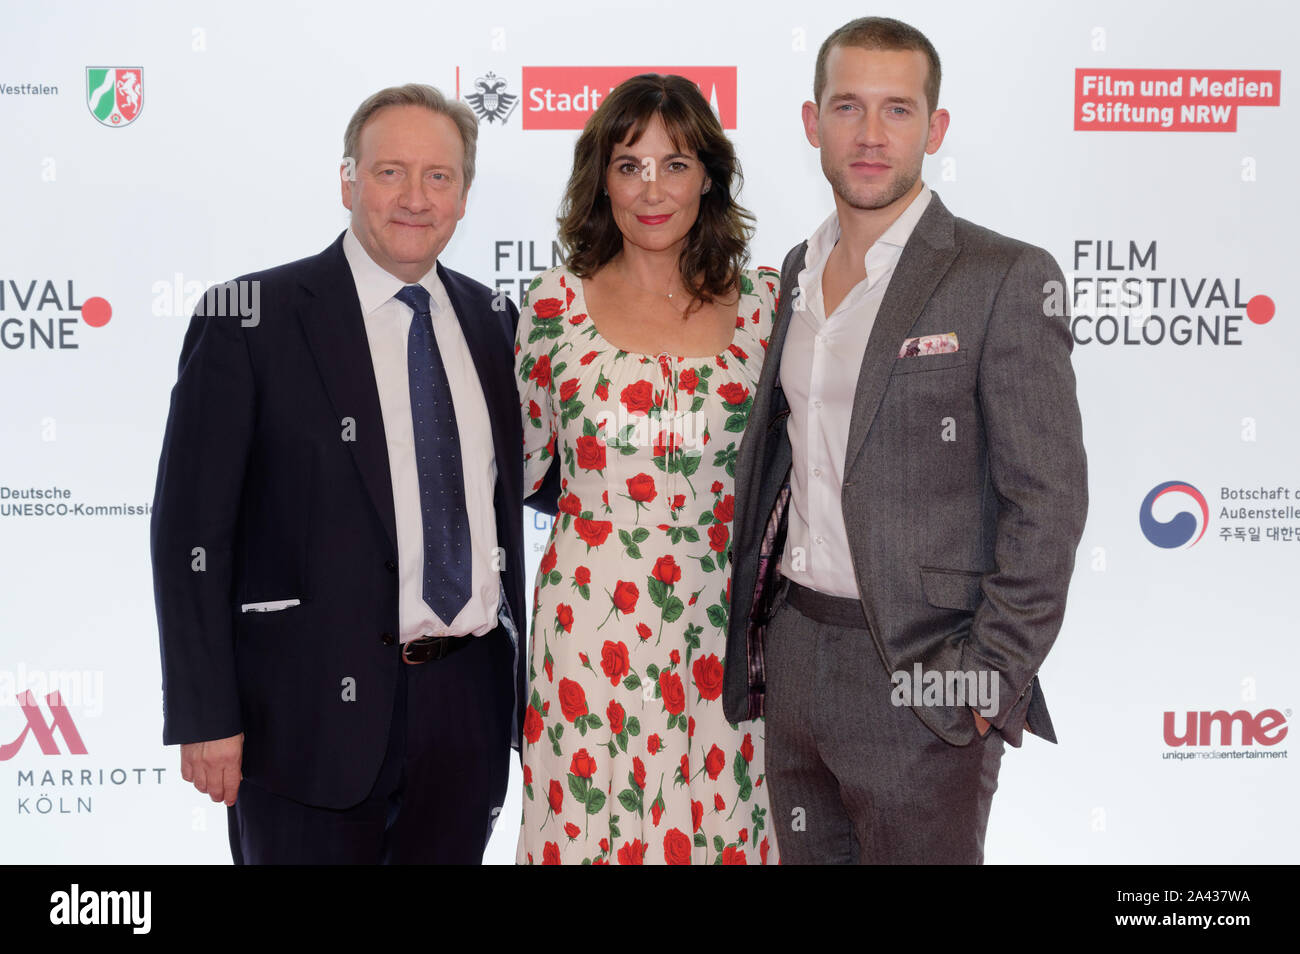 Cologne, Germany. 11th Oct, 2019. The actors Neil Dudgeon, Fiona Dolman and Nick Hendrix (l-r) come to screen the first episode of the 21st season of the crime series 'Inspector Barneby' as part of the Film Festival Cologne 2019. Credit: Henning Kaiser/dpa/Alamy Live News Stock Photo